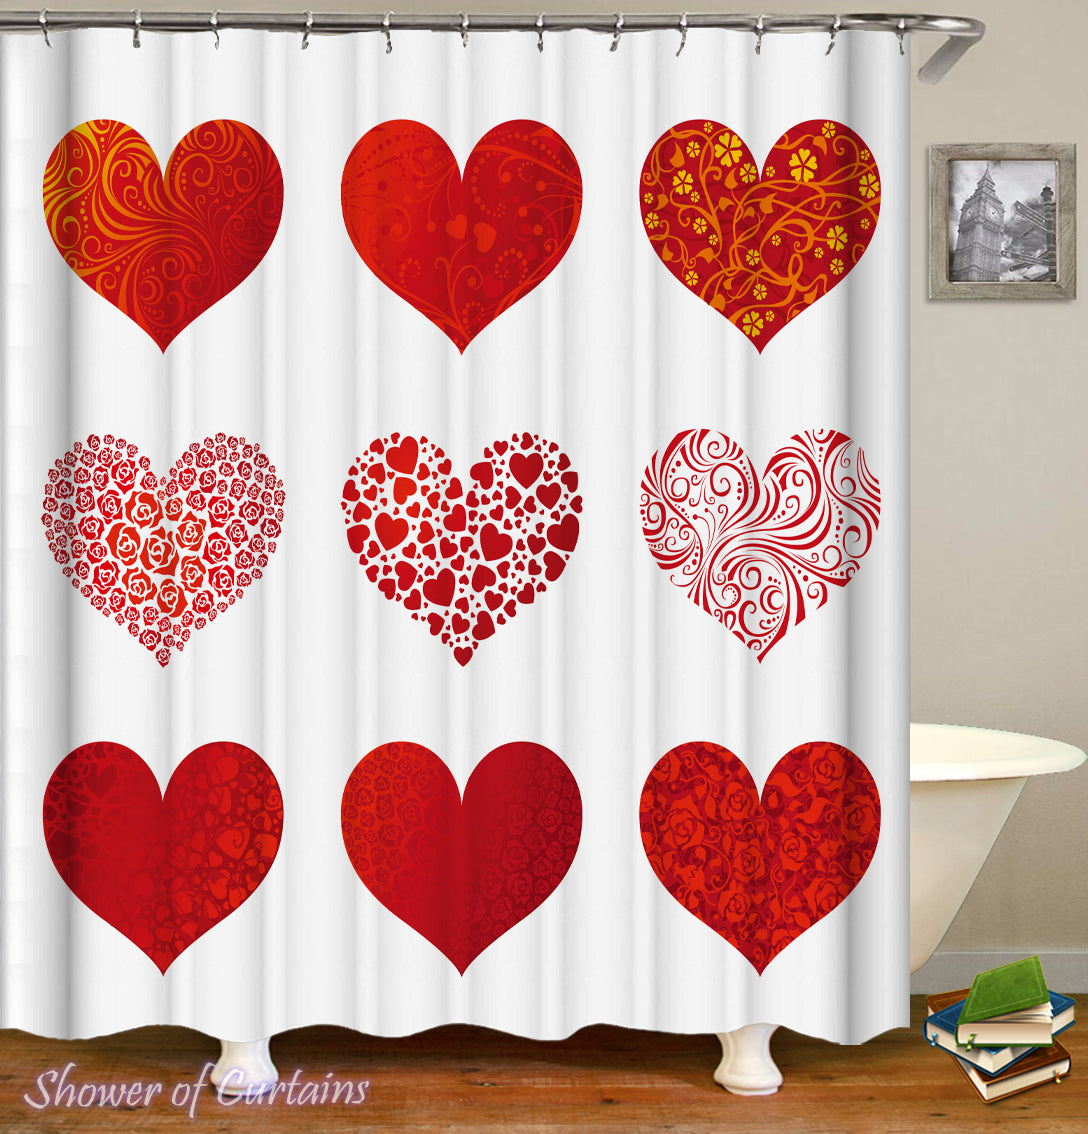 Shower Curtains The Nine Hearts – Shower Of Curtains